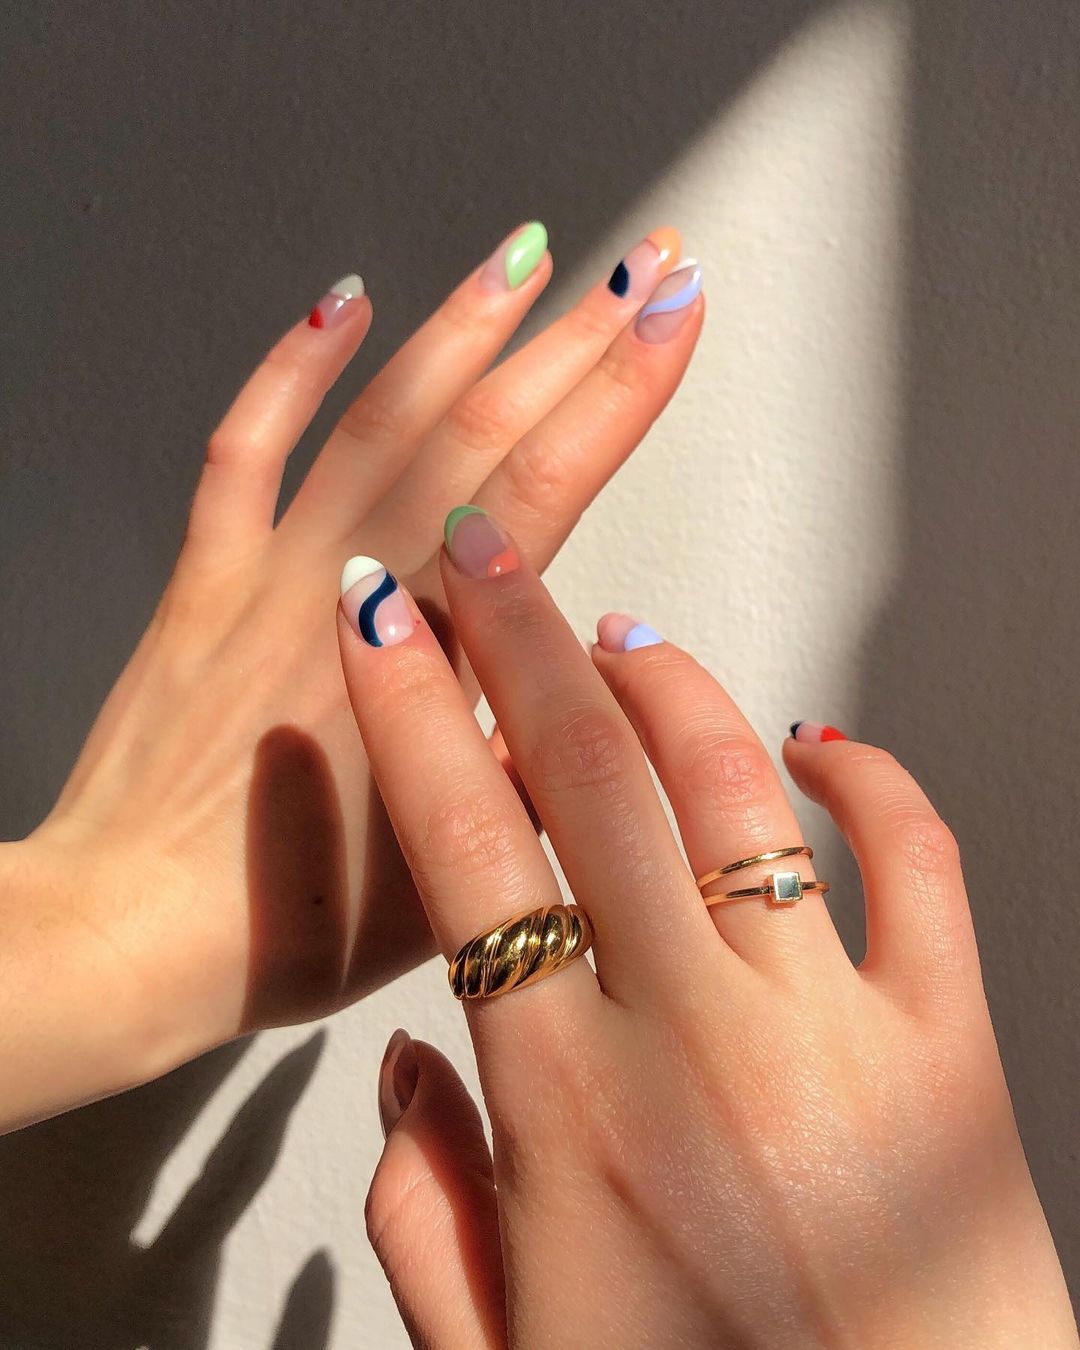 26 Colourful Nail Designs I'm Saving for My Next Manicure | Who What Wear UK